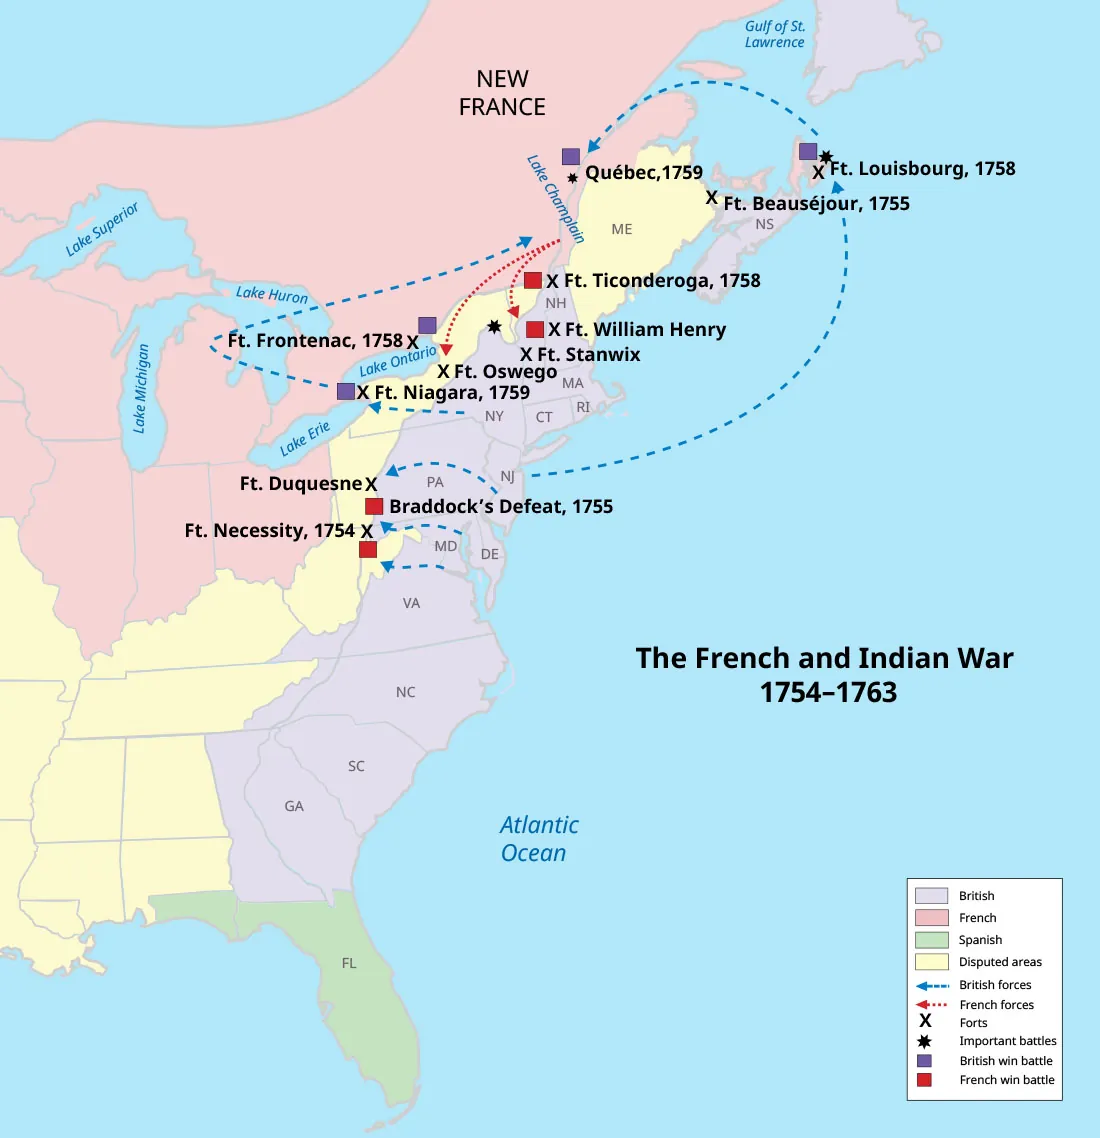 A map of the eastern portion of the United States and the Atlantic Ocean is shown and titled “The French and Indian War 1754–1763.” Areas highlighted purple indicating “British” are Nova Scotia in Canada, an unmarked island north of Nova Scotia, the states of New Hampshire, Massachusetts, New York, Connecticut, Rhode Island, Pennsylvania, New Jersey, Maryland, Delaware, Virginia, North Carolina, South Carolina, Georgia. Areas highlighted pink indicating “French” are all of the area in Canada shown, labeled “New France,” as well as Ohio, Indiana, Illinois, Michigan, Wisconsin, and lands shown to the west. Florida is highlighted green indicating the “Spanish.” Areas highlighted yellow indicating the “Disputed areas” are Maine, a thin strip of land along the southern part of Canada along Lake Ontario and Lake Erie, western Pennsylvania, West Virginia, Kentucky, Tennessee, Alabama, Mississippi, and the unlabeled lands to the west. Blue dashed arrows indicating “British forces” are shown heading from New Jersey north through the Atlantic up to Ft. Louisbourg and then on from there to Quebec. They are also shown with blue dashed arrows heading from New Jersey to Ft. Duquesne, from Maryland to Ft. Duquesne, from Delaware to Ft. Necessity, and from southern New York west to Ft. Frontenac and then east toward lake Champlain. Red dotted arrows indicating “French forces” are shown heading from Lake Champlain to Ft. William Henry and to Ft. Oswego. A black “X” is shown indicating “Forts.” The forts listed from the north to the south are: Ft. Louisbourg, 1758; Ft. Beausejour, 1755; Ft. Ticonderoga, 1758; Ft. William Henry; Ft. Stanwix; Ft. Frontenac, 1758; Ft. Oswego; Ft. Niagara, 1759; Ft. Duquesne; and Ft. Necessity, 1754. Black asterisks are shown indicating “Important battles” at Quebec, 1759; Ft. Louisbourg, 1758; and an area in northern New York. Purple boxes indicate “British win battle” at: Quebec, 1759; Ft. Louisbourg, 1758; Ft. Frontenac, 1758; and Ft. Niagara, 1759. Red boxes indicate “French win battle” at Ft. Ticonderoga, 1758; Ft. William Henry; Braddock’s defeat, 1756 at Ft. Duquesne and Ft. Necessity, 1754.